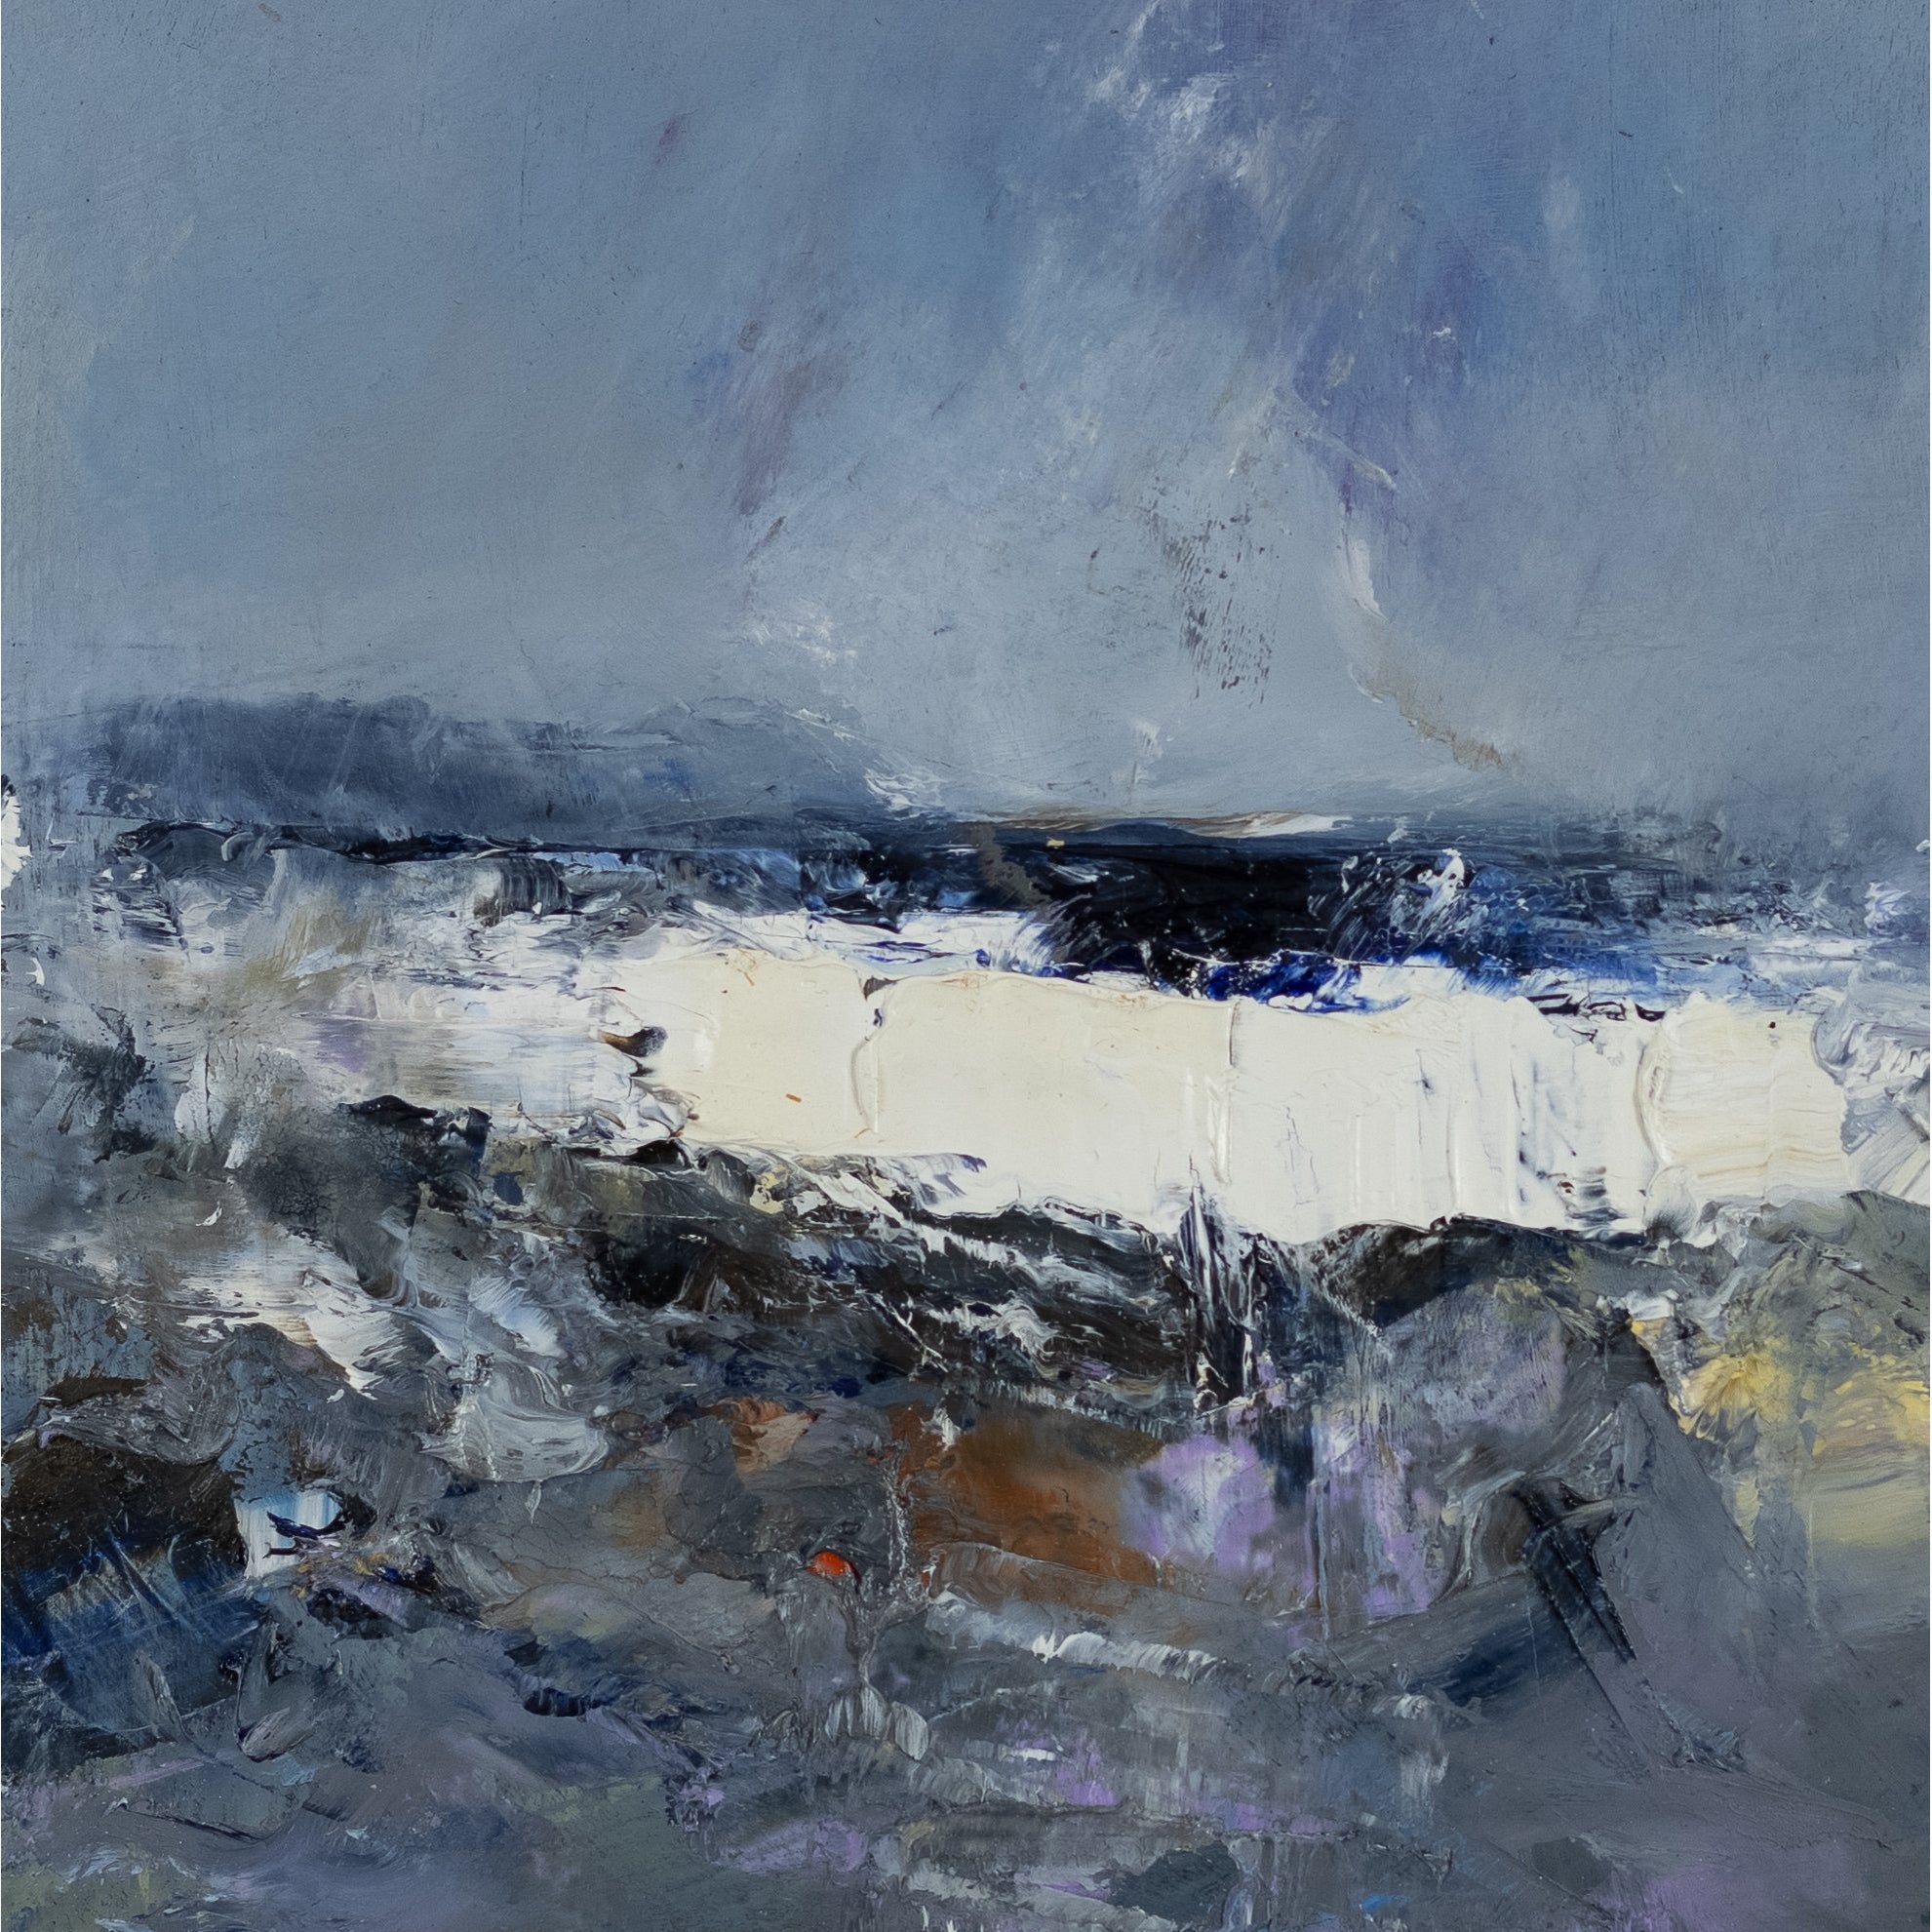 'Brewing Storm' oil on board original by Ian Rawnsley, available at Padstow Gallery, Cornwall